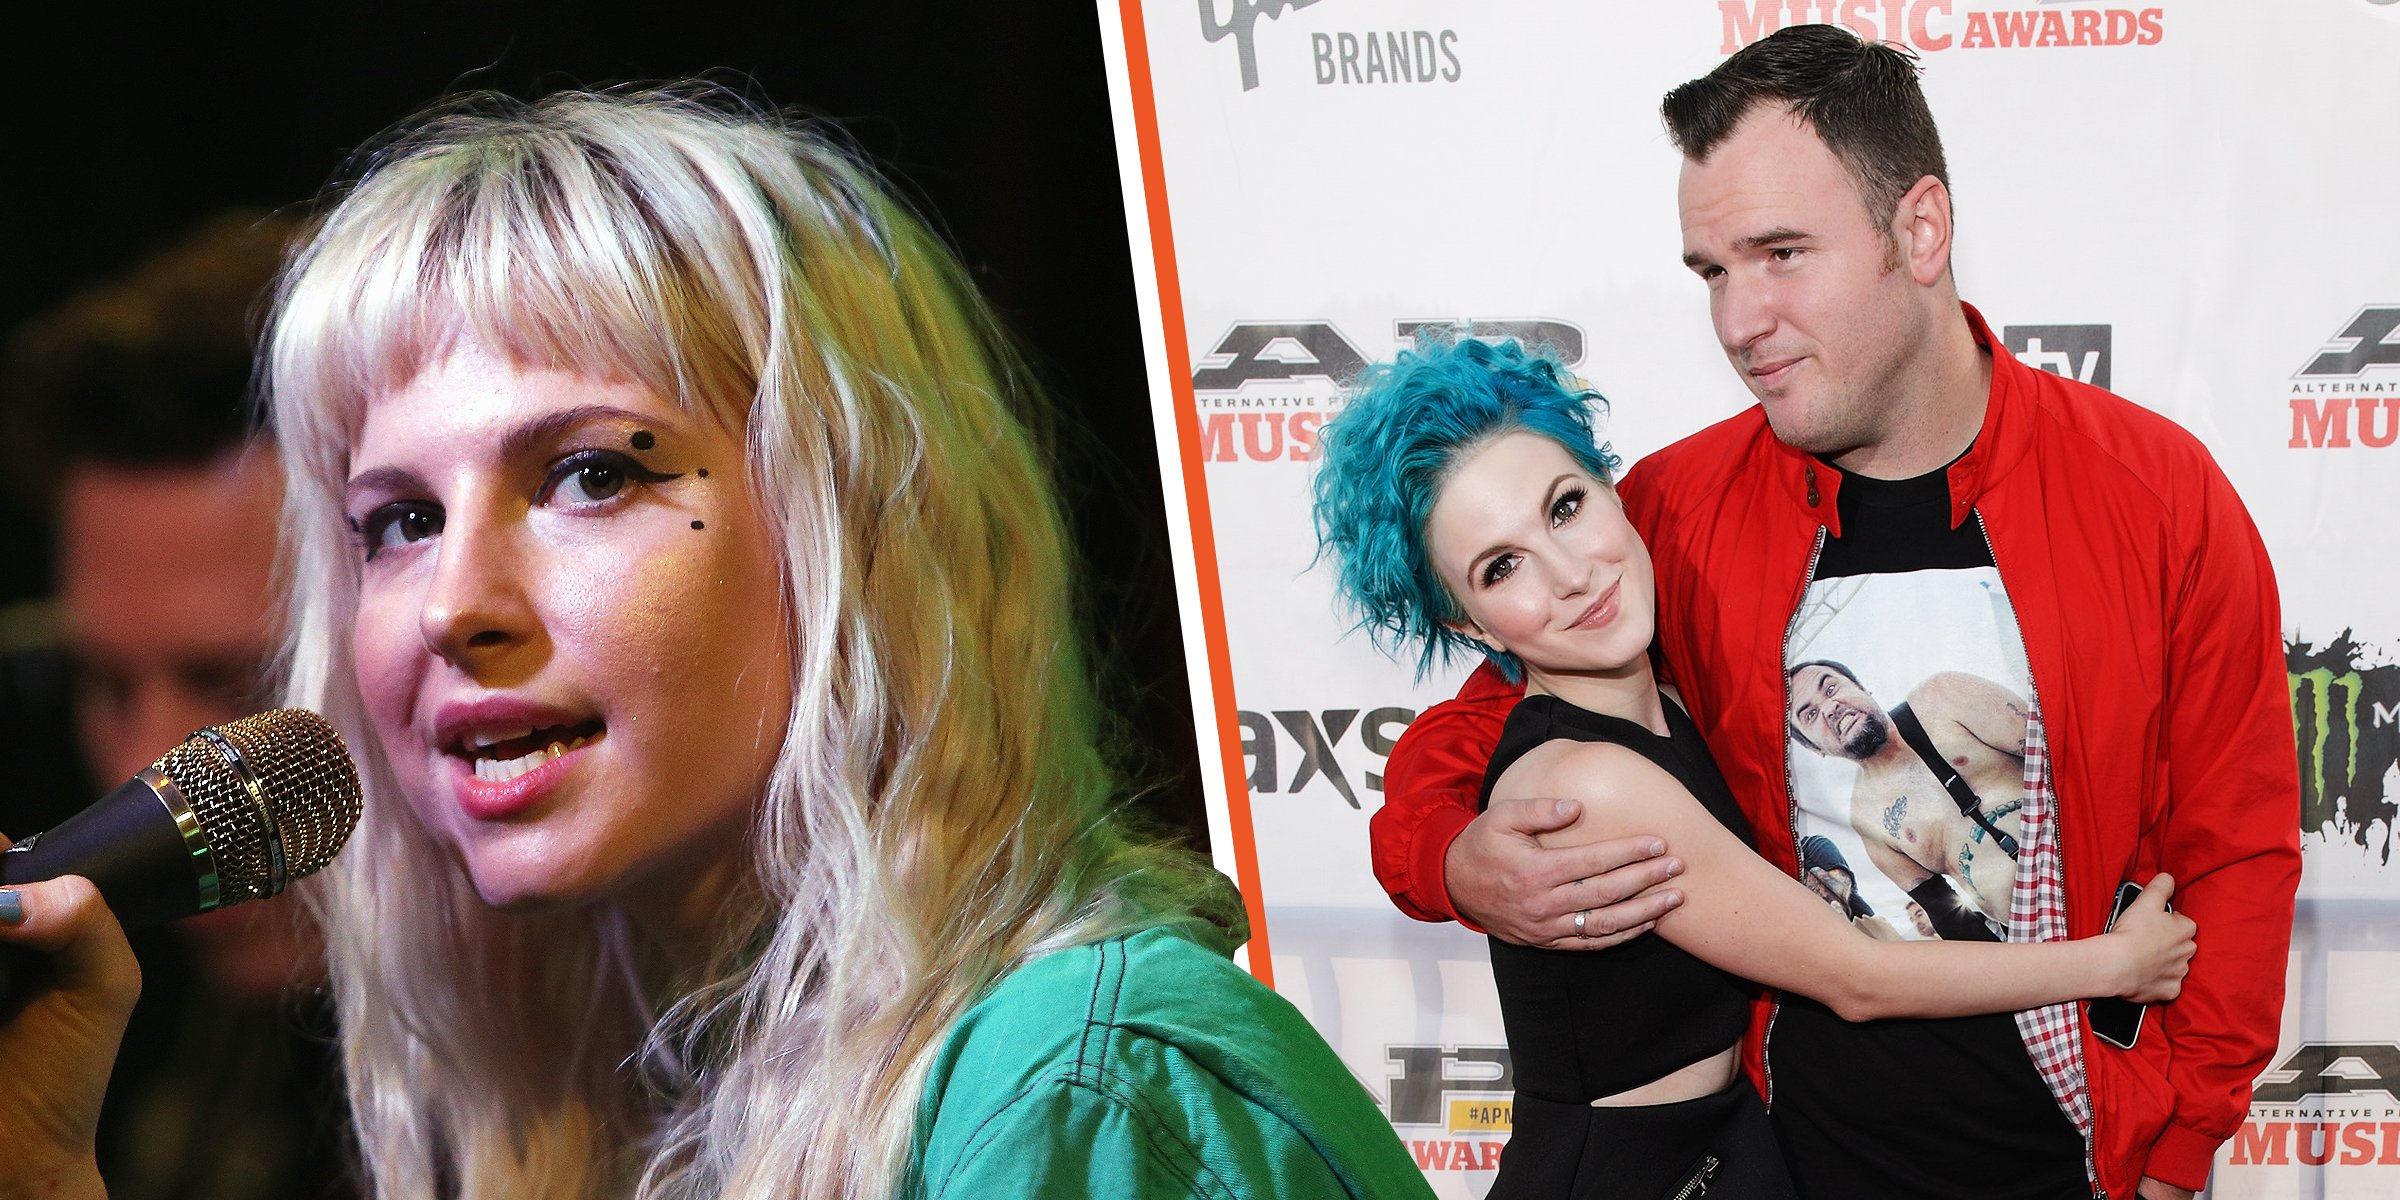 Hayley Williams Performing | Hayley Williams Posing on the Red Carpet with Chad Gilbert | Source: Getty Images